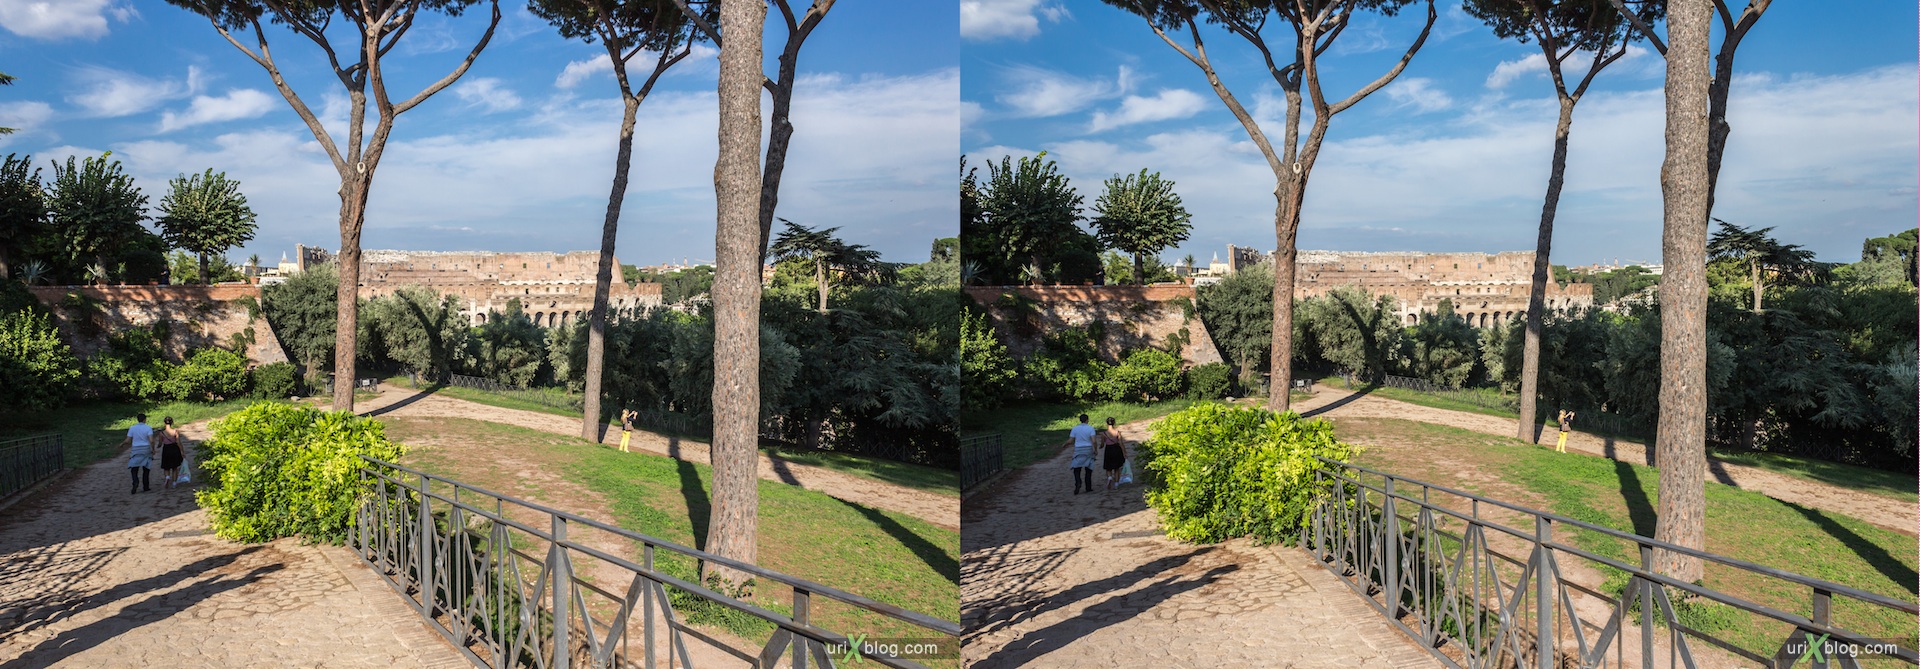 2012, Roman Forum, Palatine Hill, Rome, Italy, ancient rome, city, 3D, stereo pair, cross-eyed, crossview, cross view stereo pair